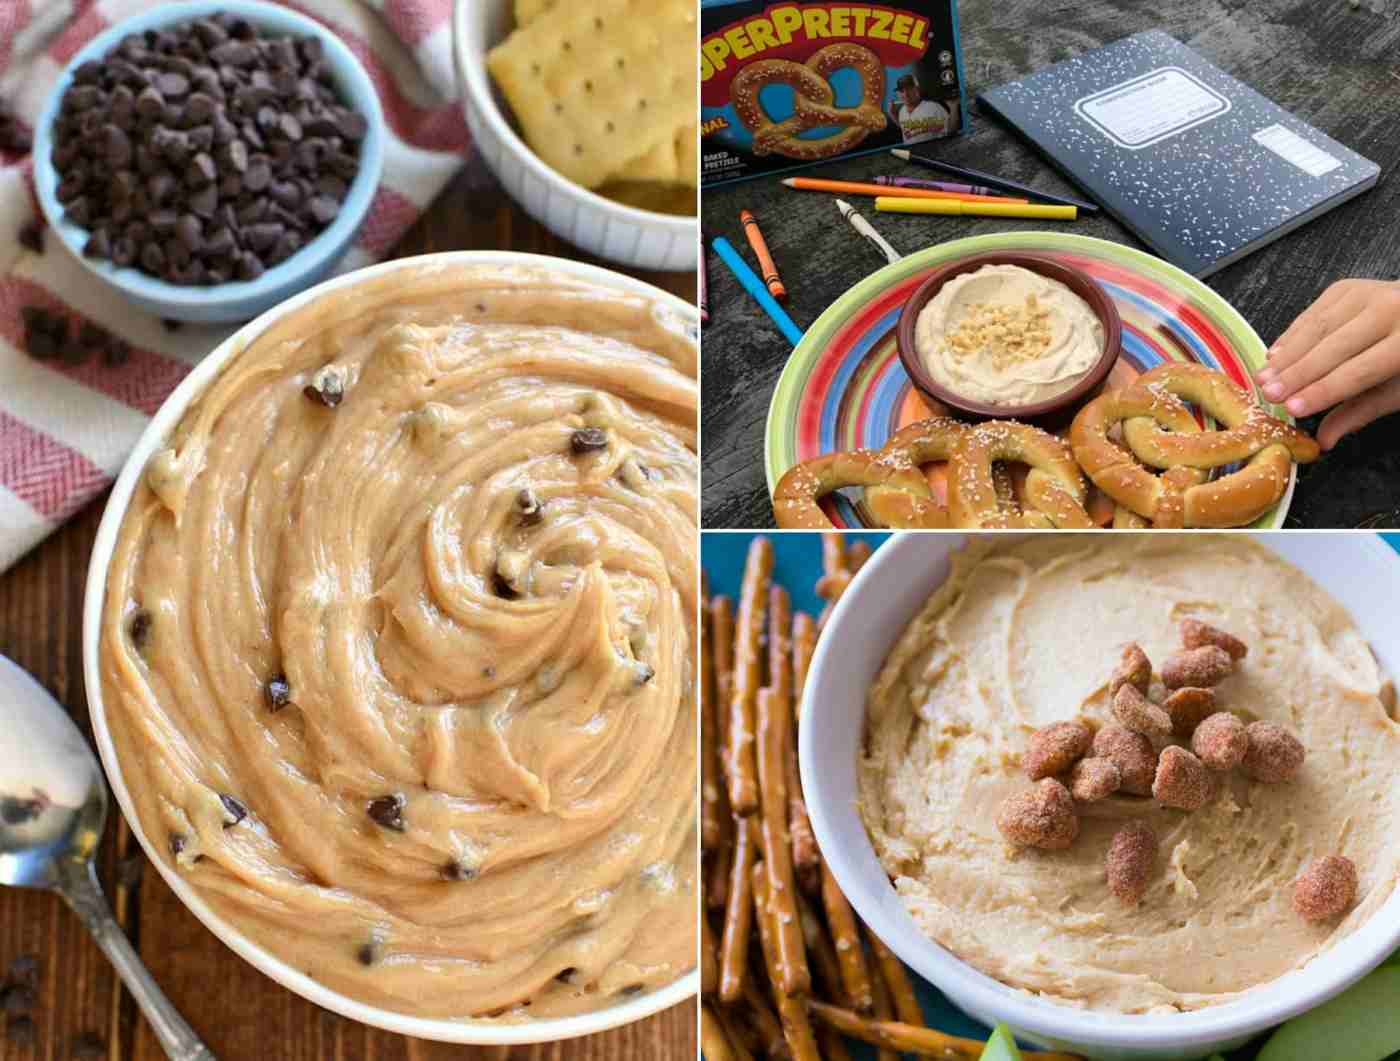 Peanut butter dip with honey or agave juice and Greek yogurt